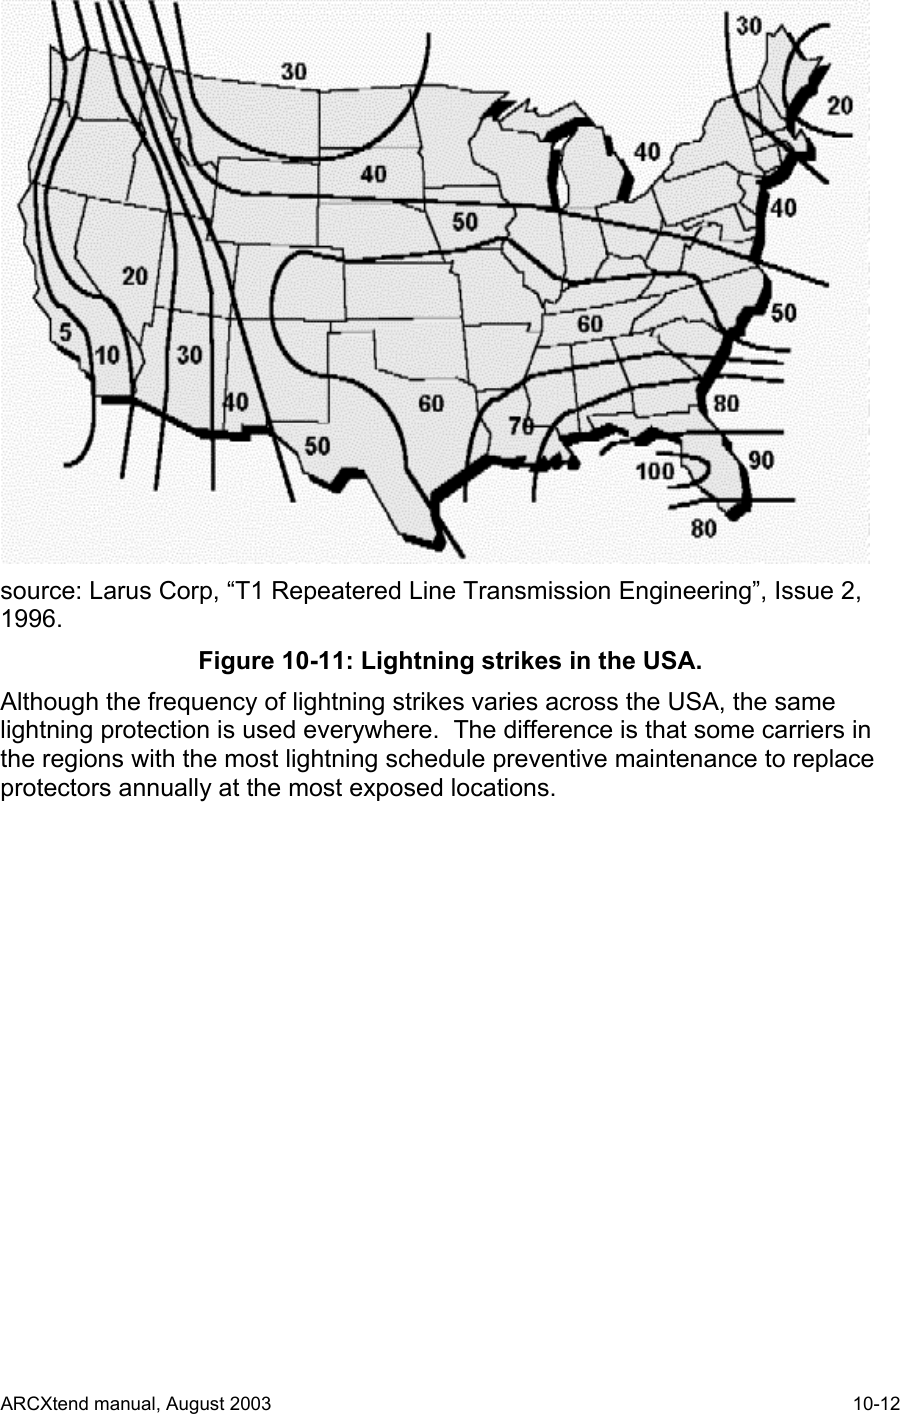   source: Larus Corp, “T1 Repeatered Line Transmission Engineering”, Issue 2, 1996. Figure 10-11: Lightning strikes in the USA. Although the frequency of lightning strikes varies across the USA, the same lightning protection is used everywhere.  The difference is that some carriers in the regions with the most lightning schedule preventive maintenance to replace protectors annually at the most exposed locations. ARCXtend manual, August 2003    10-12 